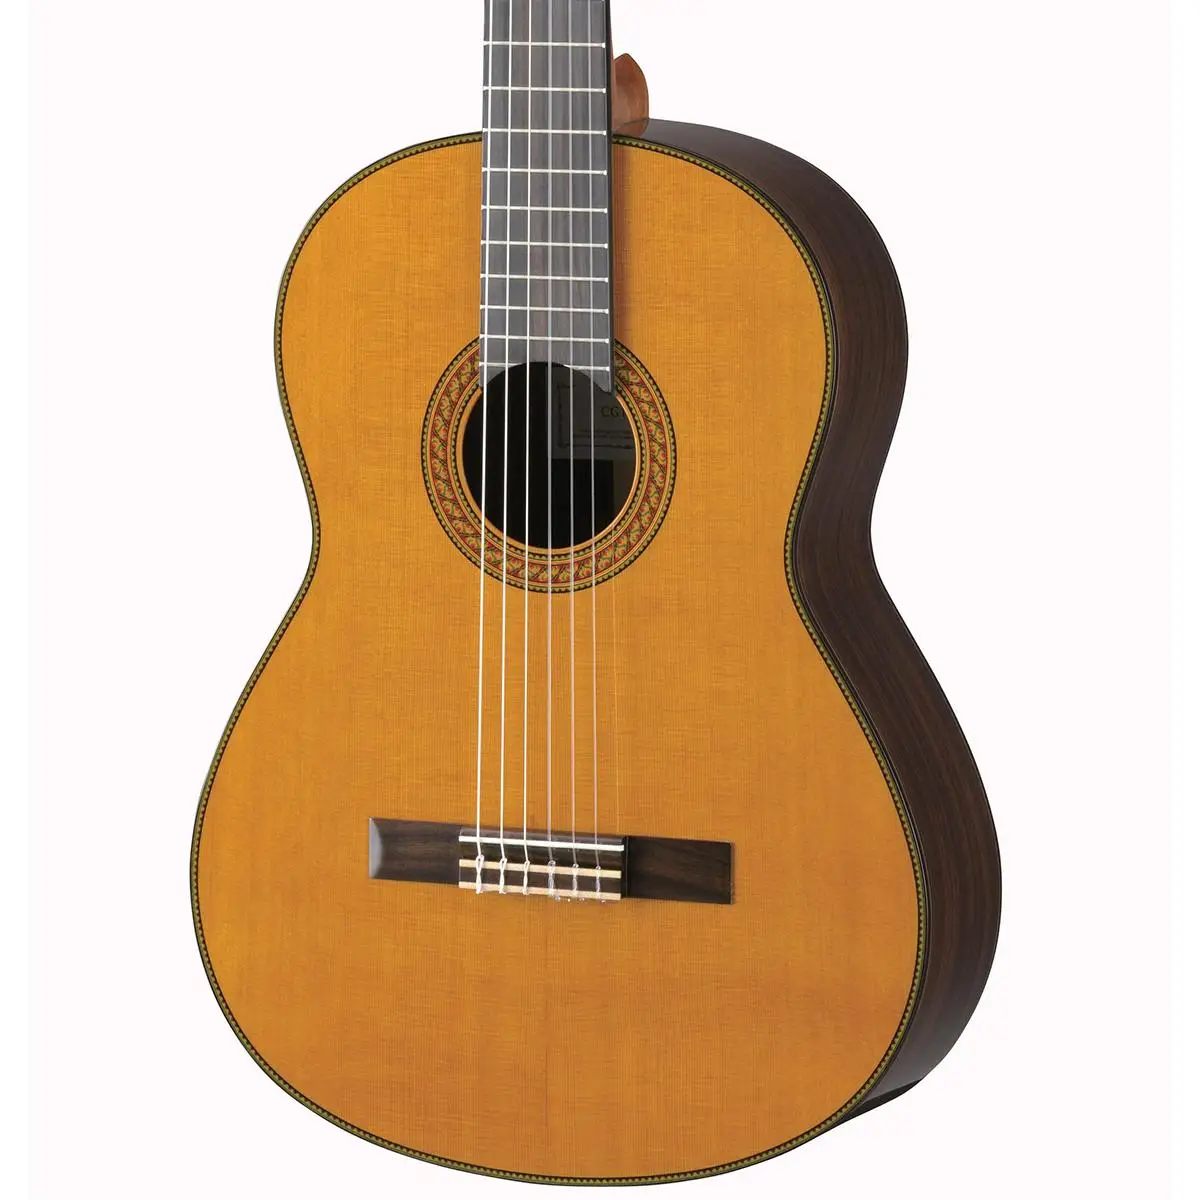 Yamaha CG192C Classical Guitar Review: A Harmonious Blend of Tradition and Quality